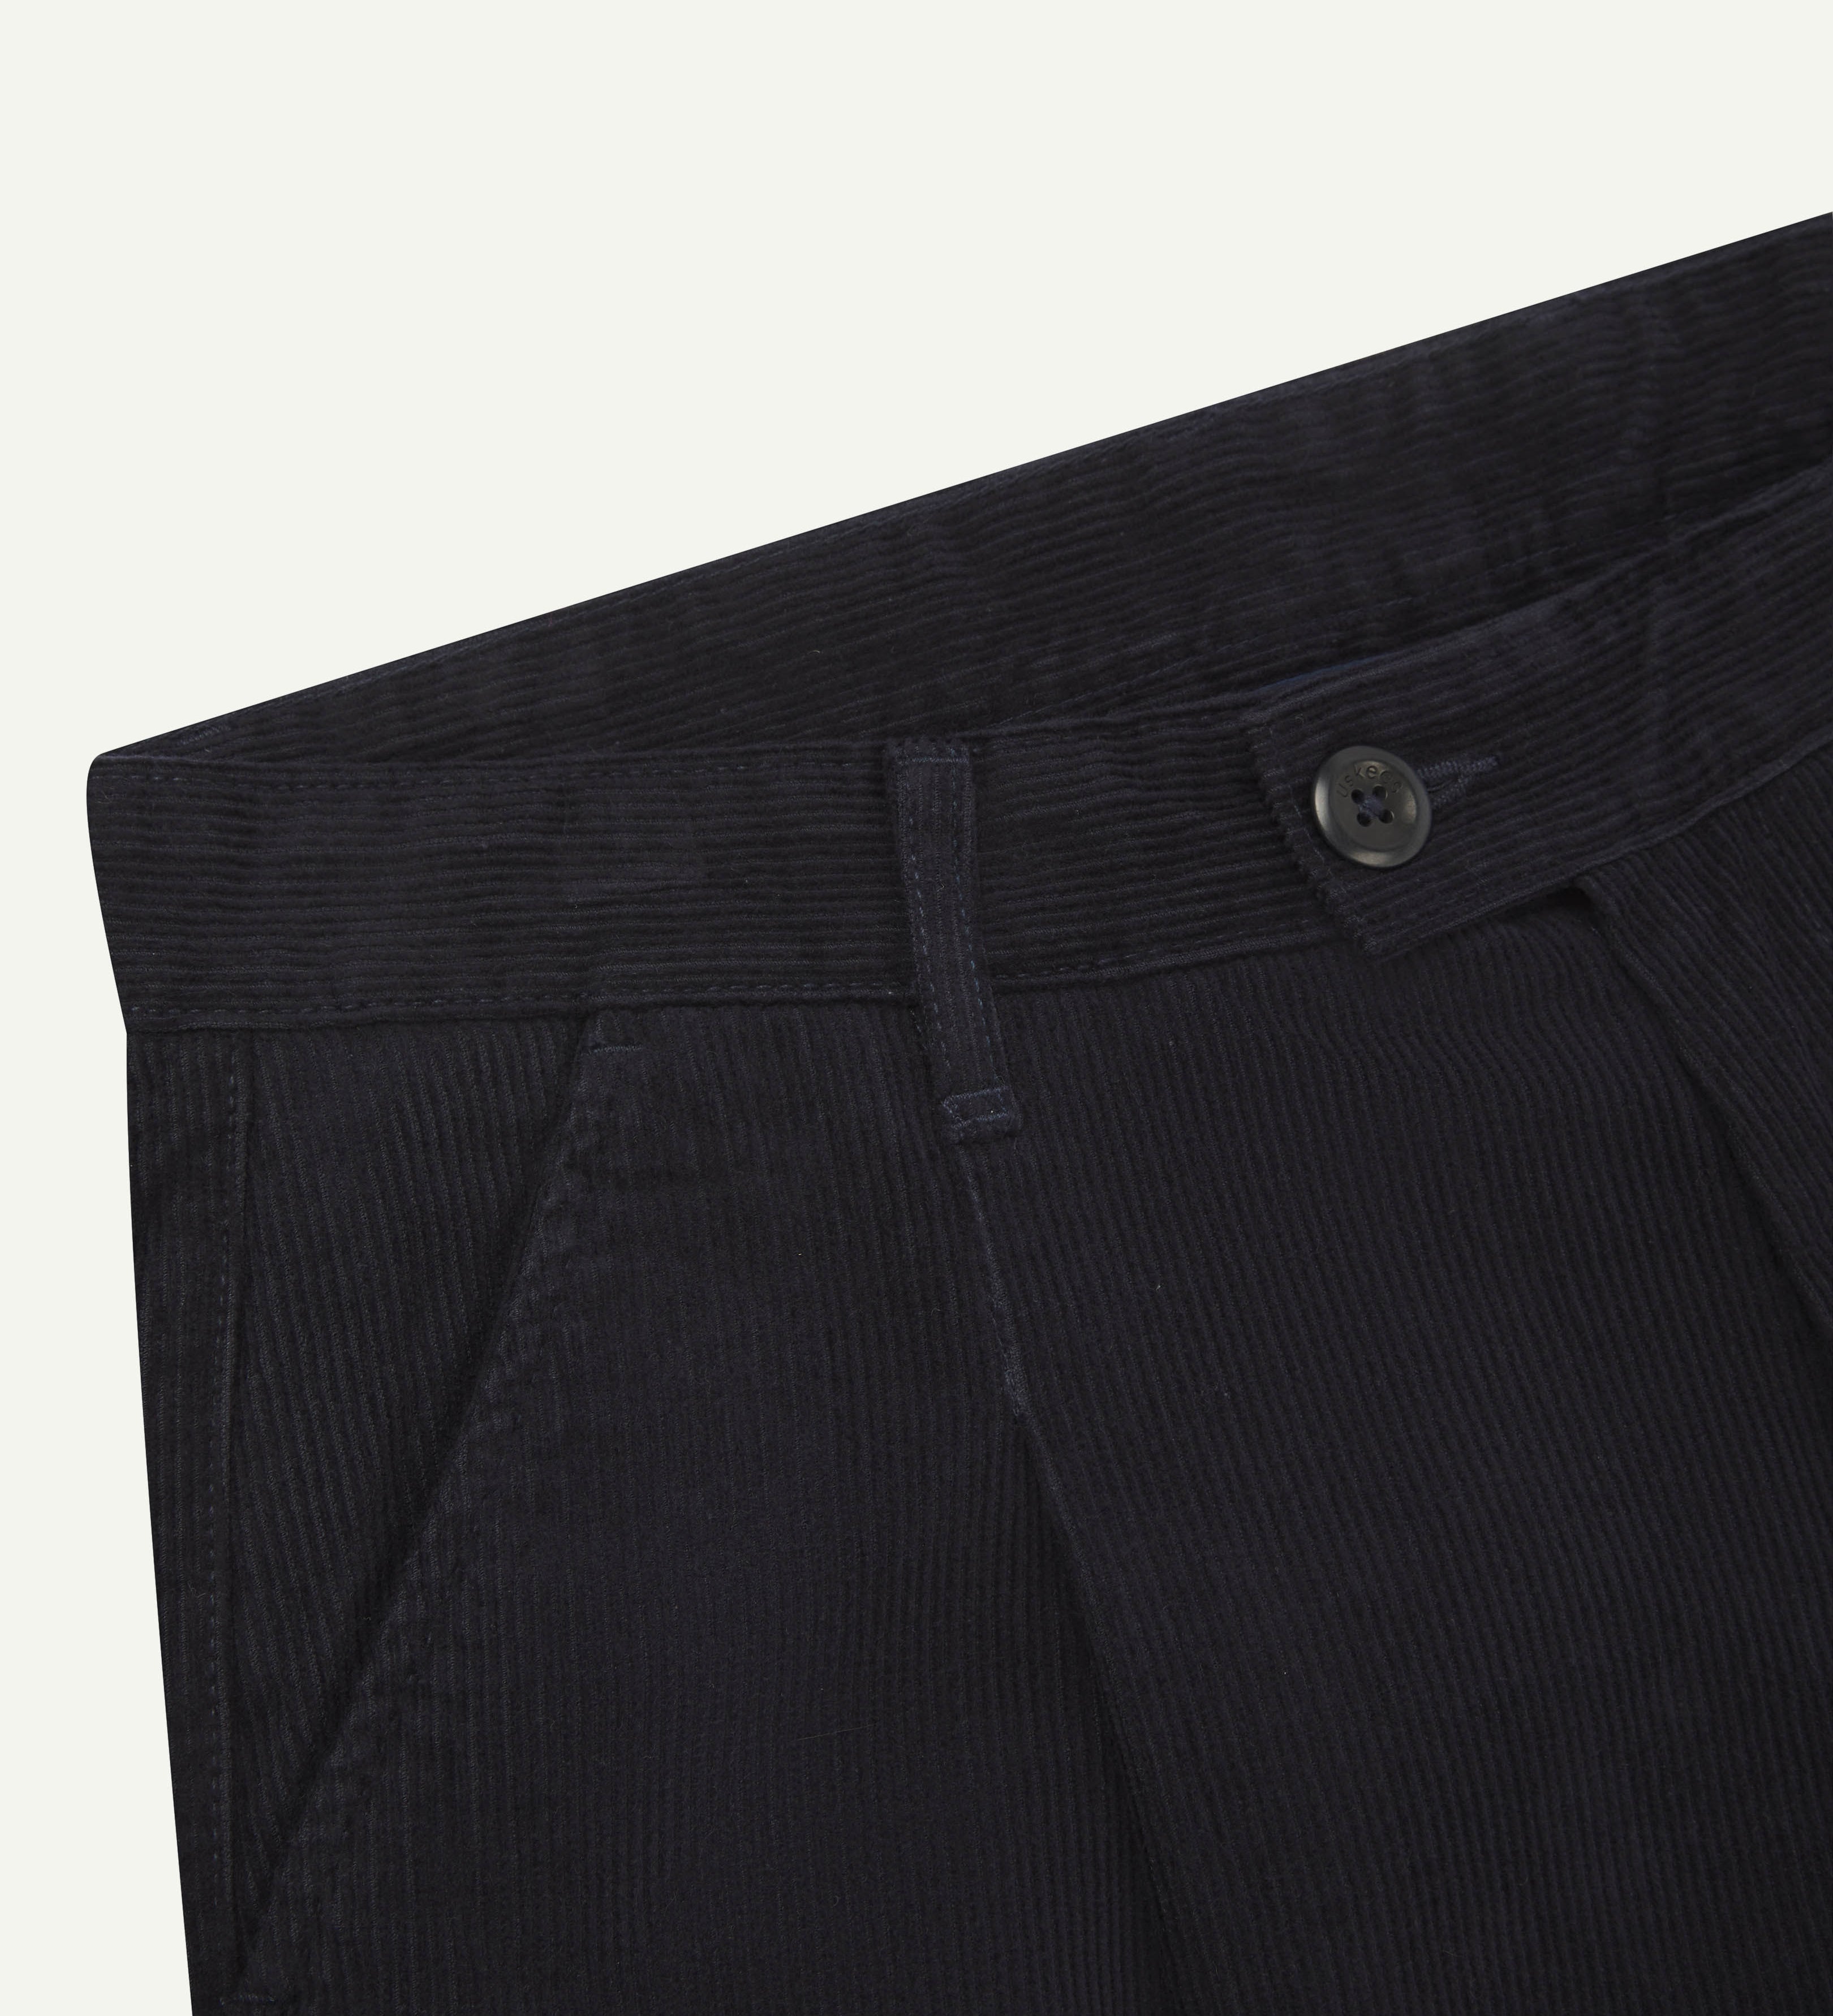 Front close-up shot of #5018 Uskees men's organic corduroy boat trousers in navy blue showing belt loop, buttoned waist and slanted front pocket.